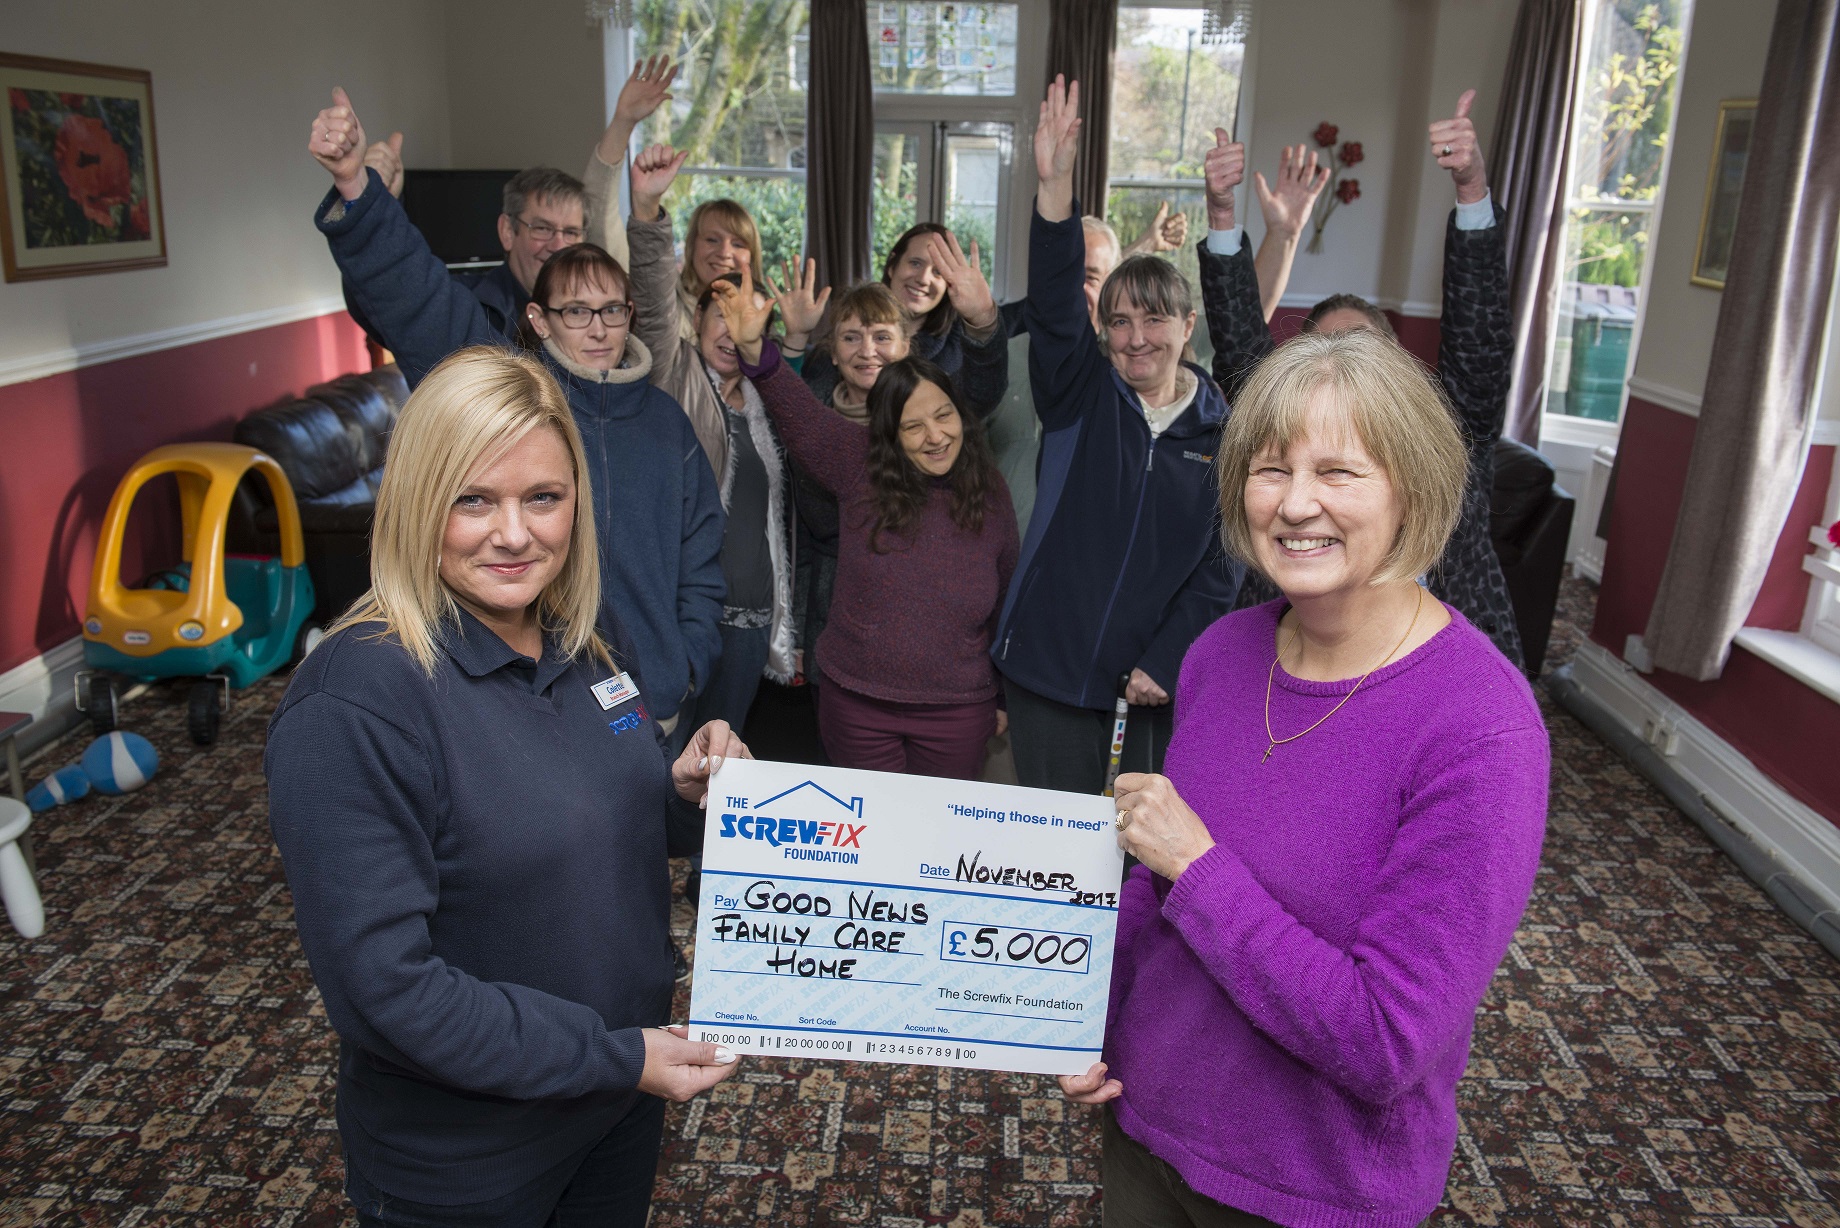 Good News Family Care Homes receives generous donation from the Screwfix Foundation